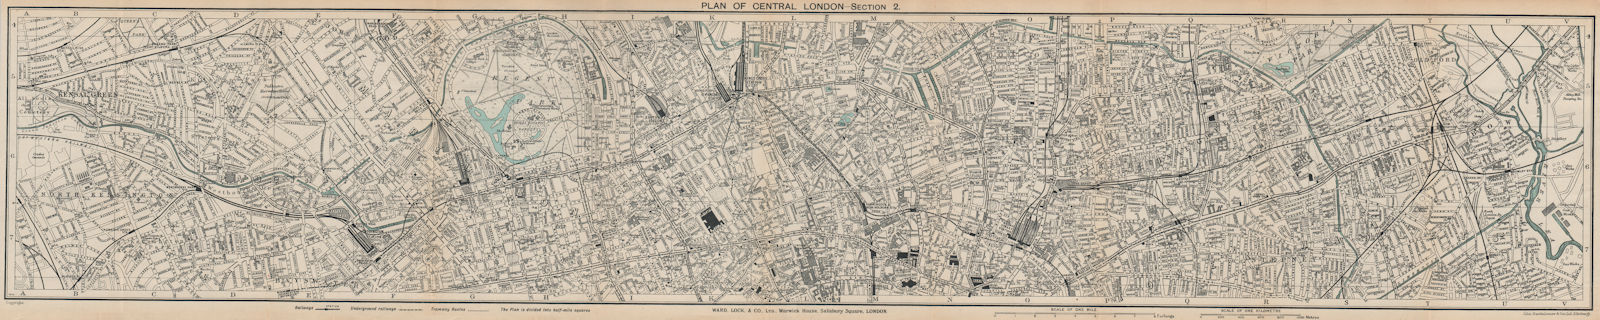 Associate Product CENTRAL LONDON-SECTION 2 vintage town/city plan. London. WARD LOCK 1930 map